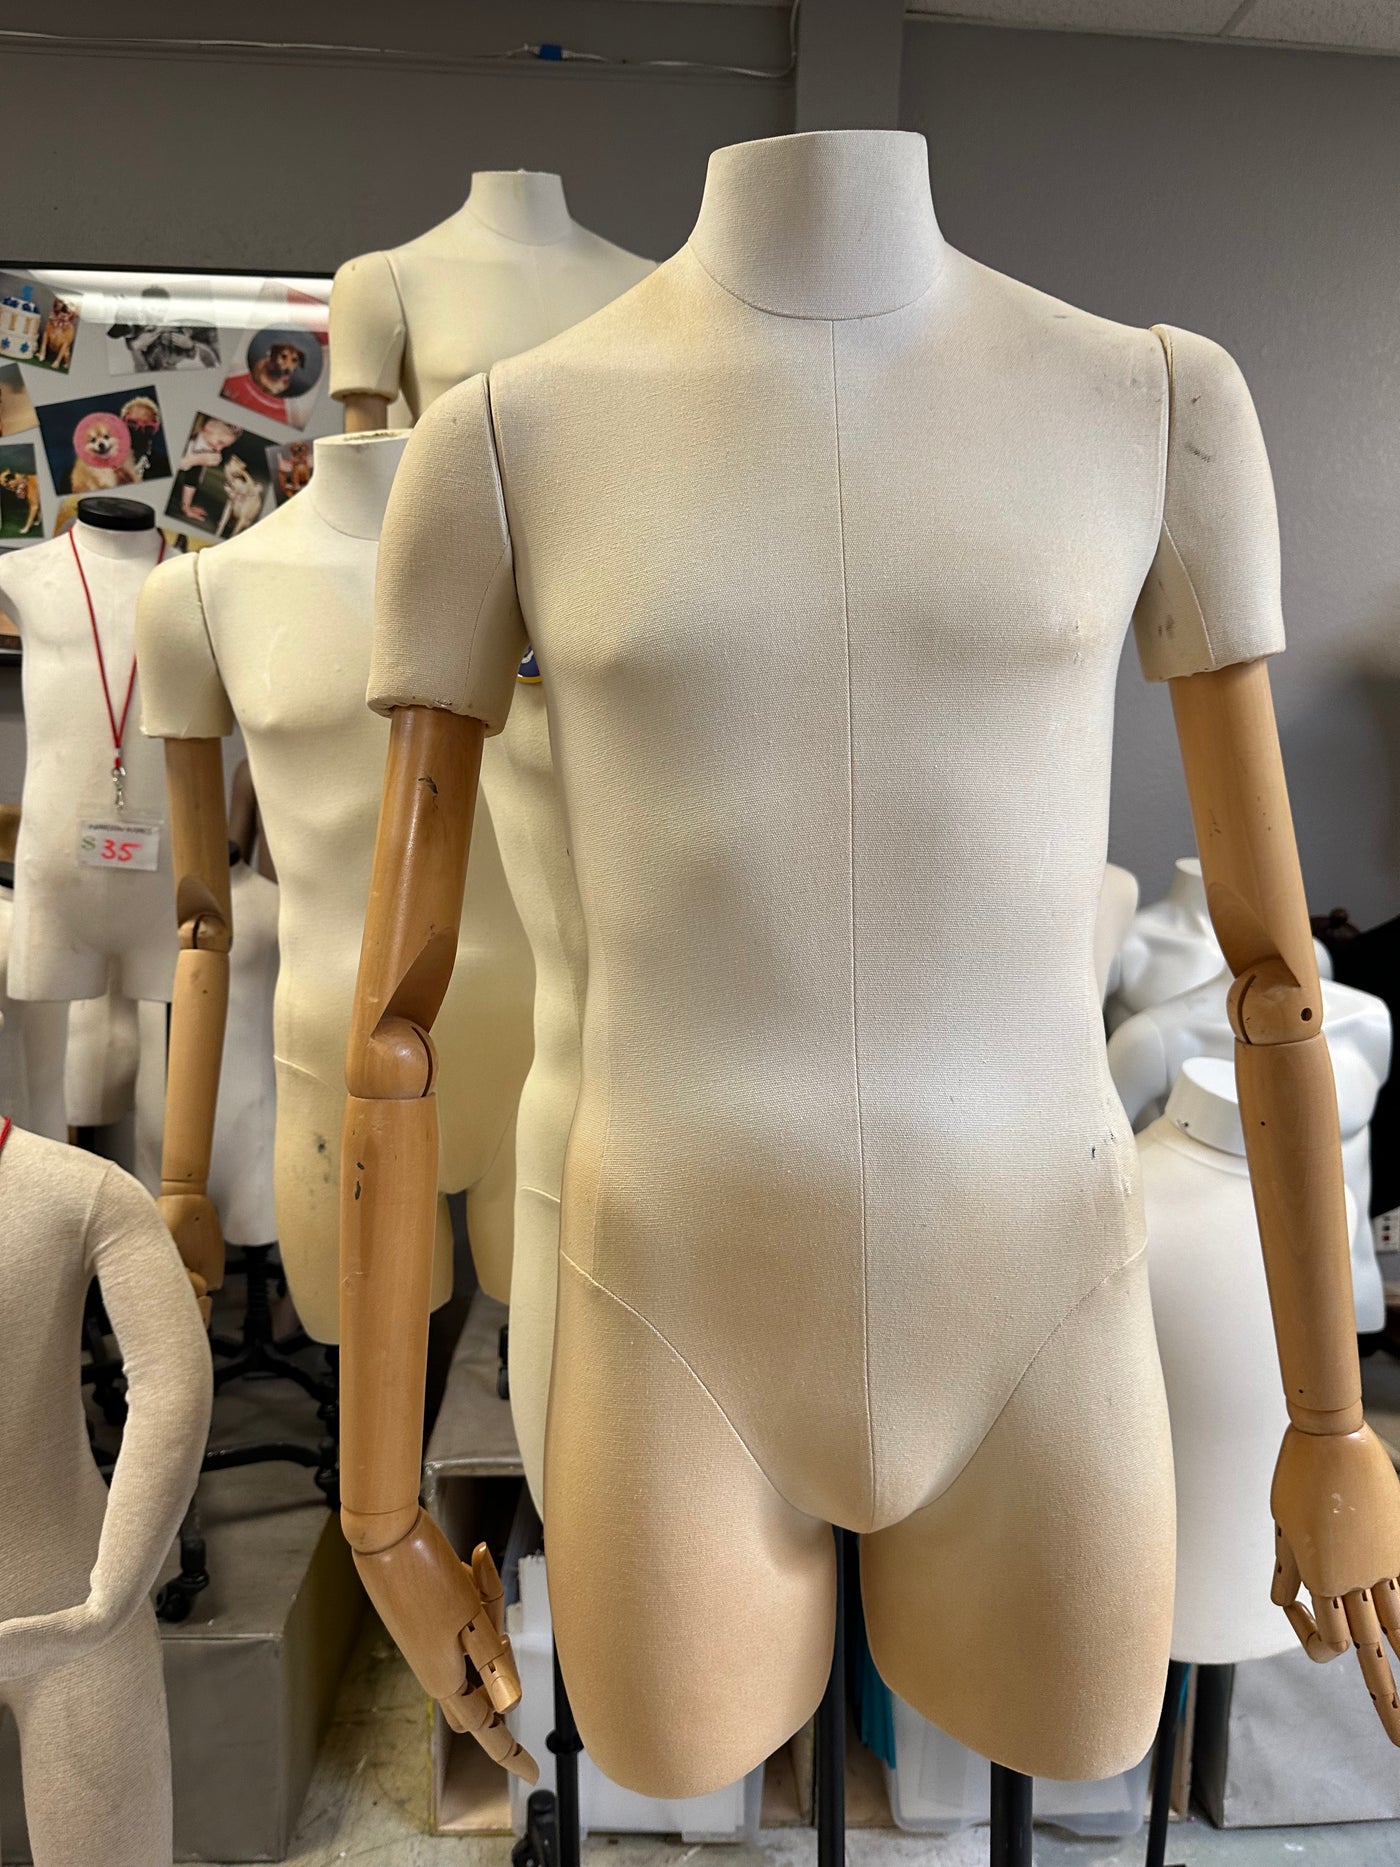 Rental Male Dress Form with Bendable Arms(weekly rate)